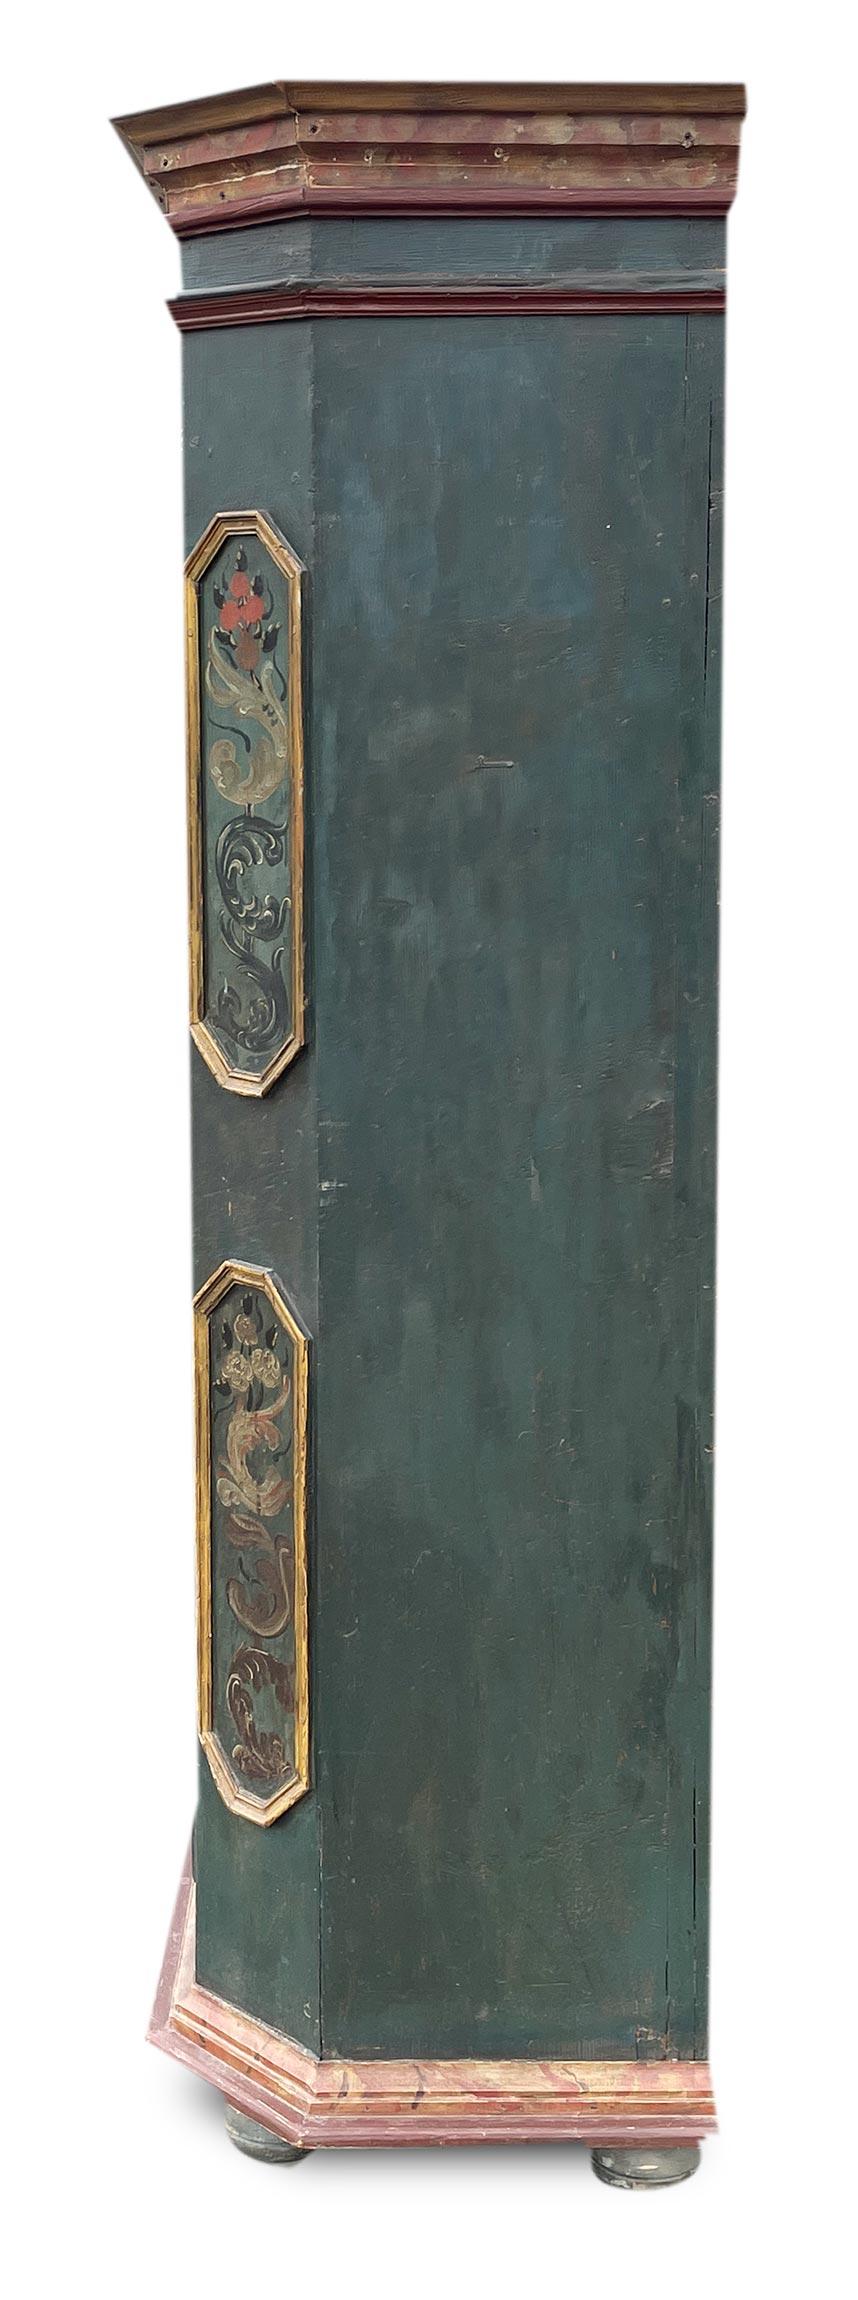 Tyrolean Blue-Green wardrobe dated 1770

Period: 1770 (dated)
Origin: Tyrol
Essence: Fir
Measures:
Height: 196cm
Width: 147 cm (160 cm at the frames)
Depth: 50 cm (56 cm at the frames)

Tyrolean wardrobe, with two doors, entirely painted in a